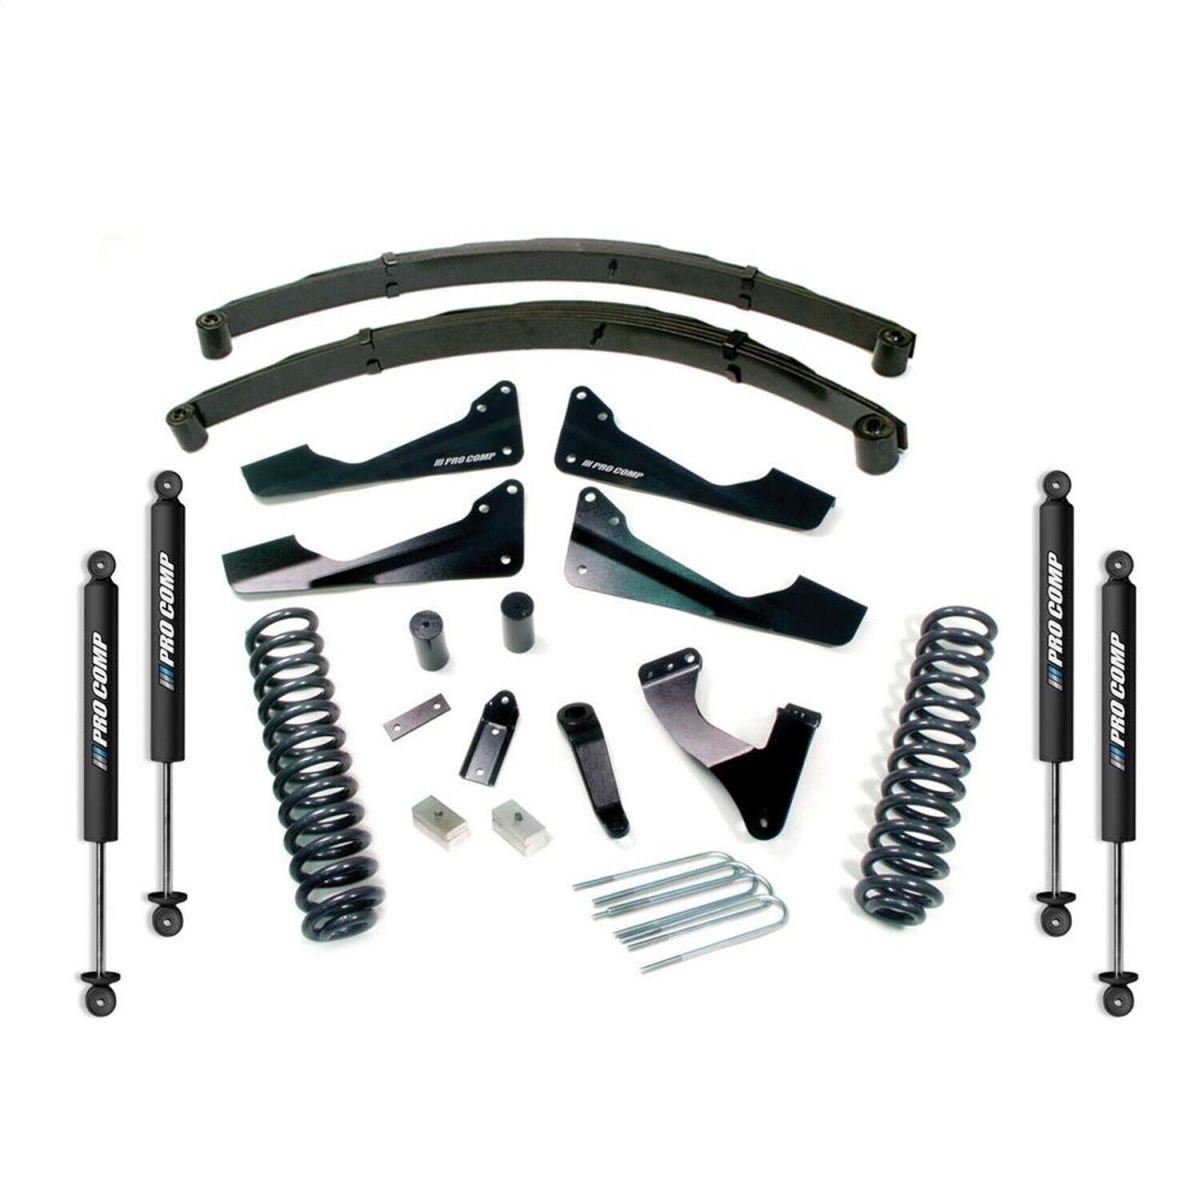 EXPK4165T 6 in. Stage I Lift Kit with PRO-X Shocks for 2008-2010 FORD F-250 Super Duty -  Pro Comp Suspension